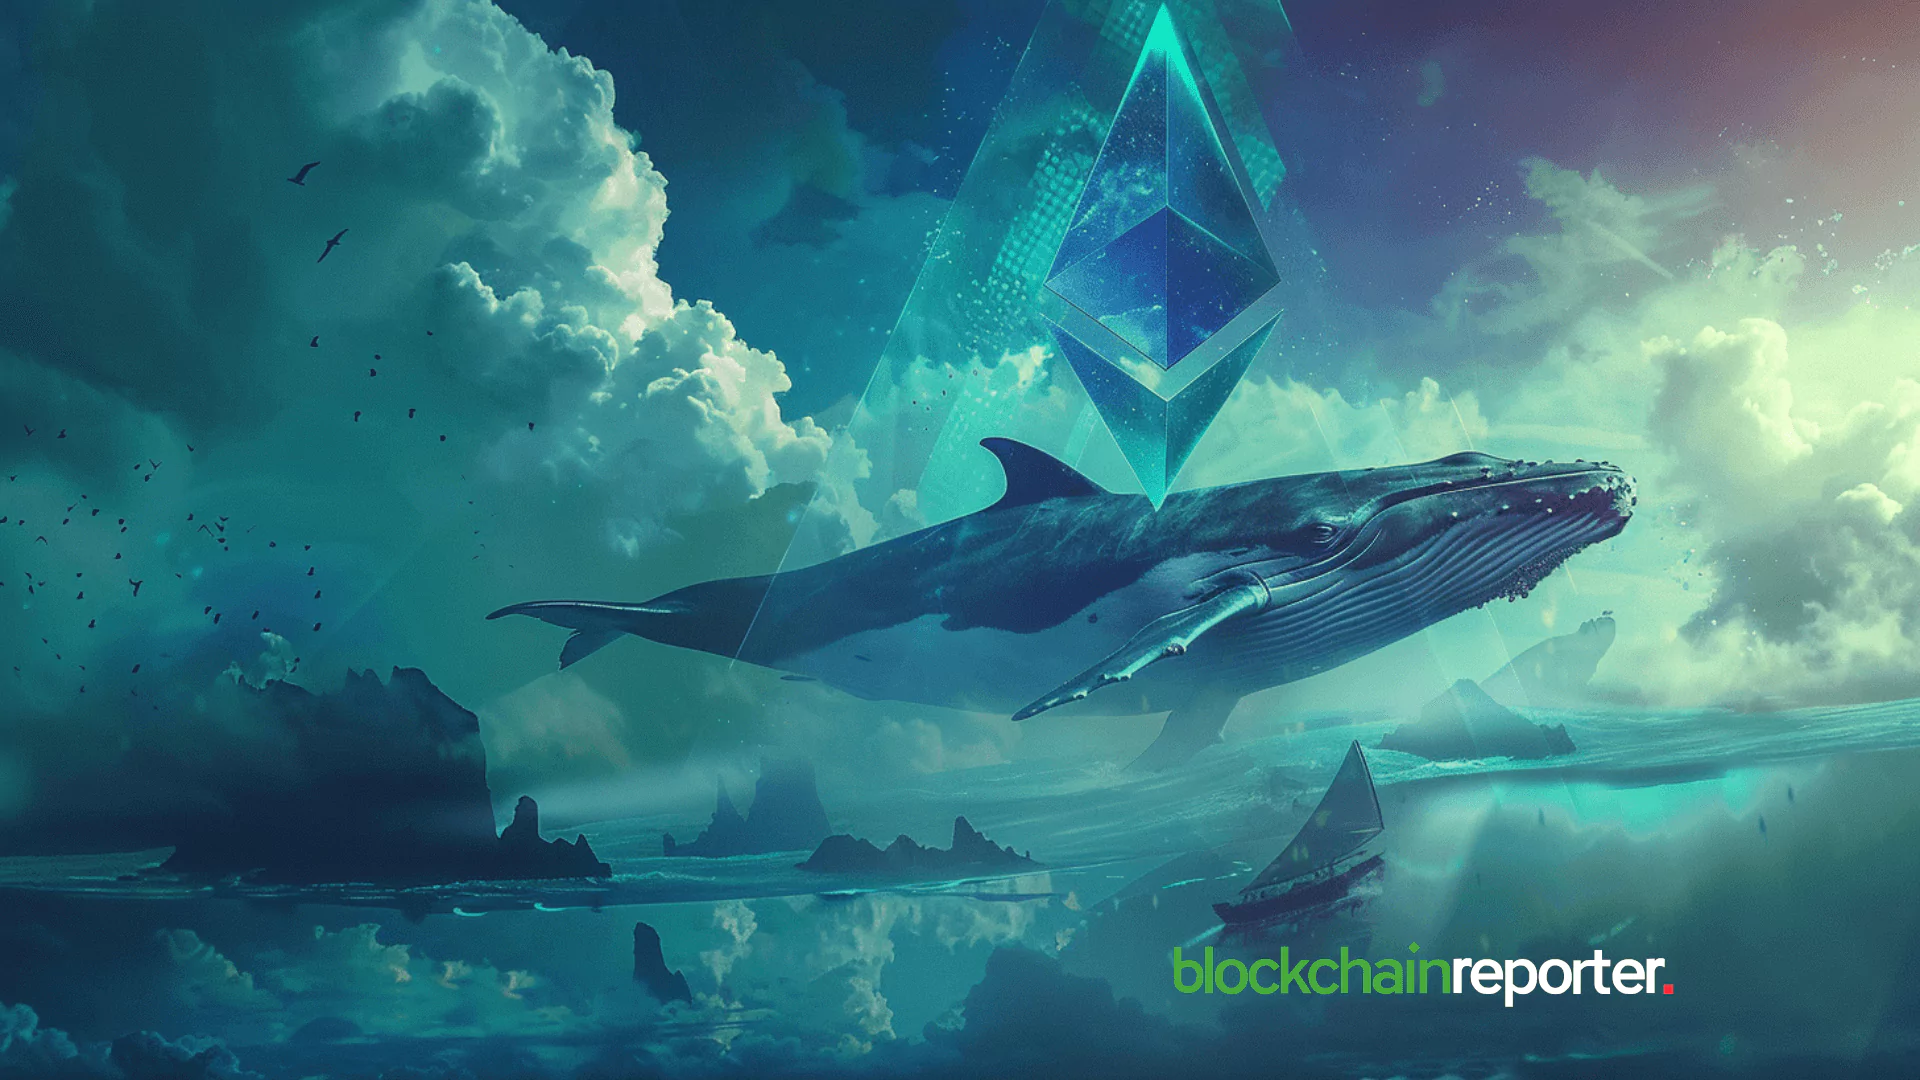 Ethereum Whale Moves $101.7M ETH from Bitfinex to Spark, Lookonchain Reports